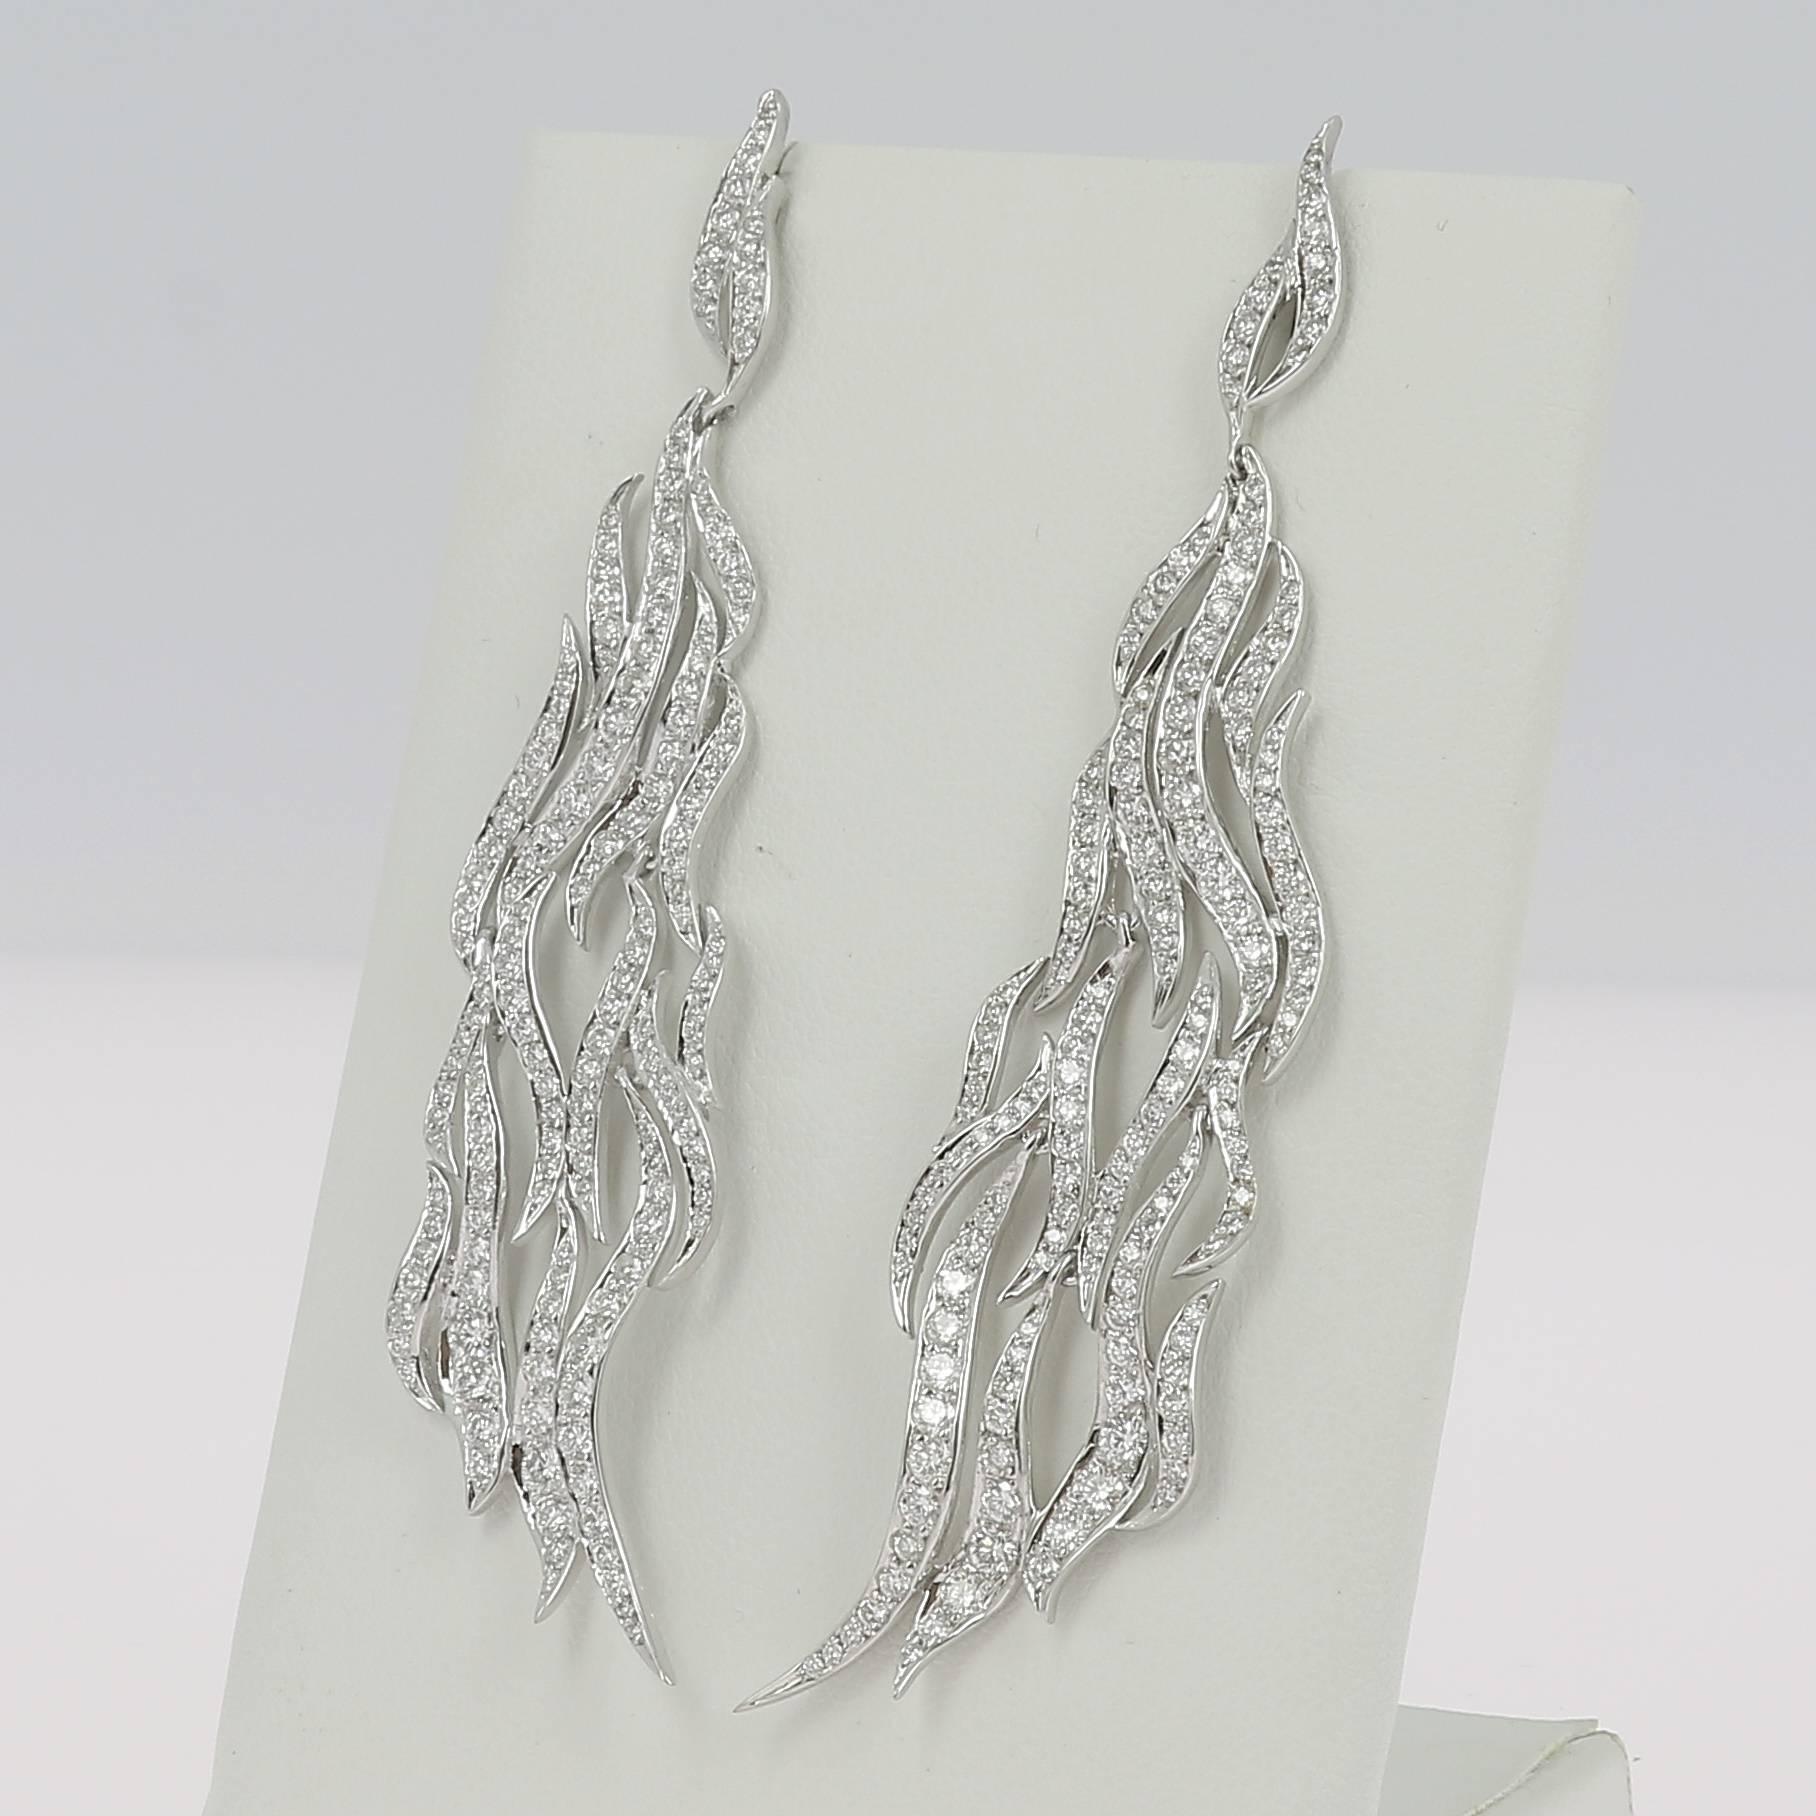 An amazing pendant earrings set with a combination of wavy parts paved with Round Diamonds weighing 3.28 carats
The Diamonds are GVS qualities.
The Drop Leaves Earring is 18K White Gold.